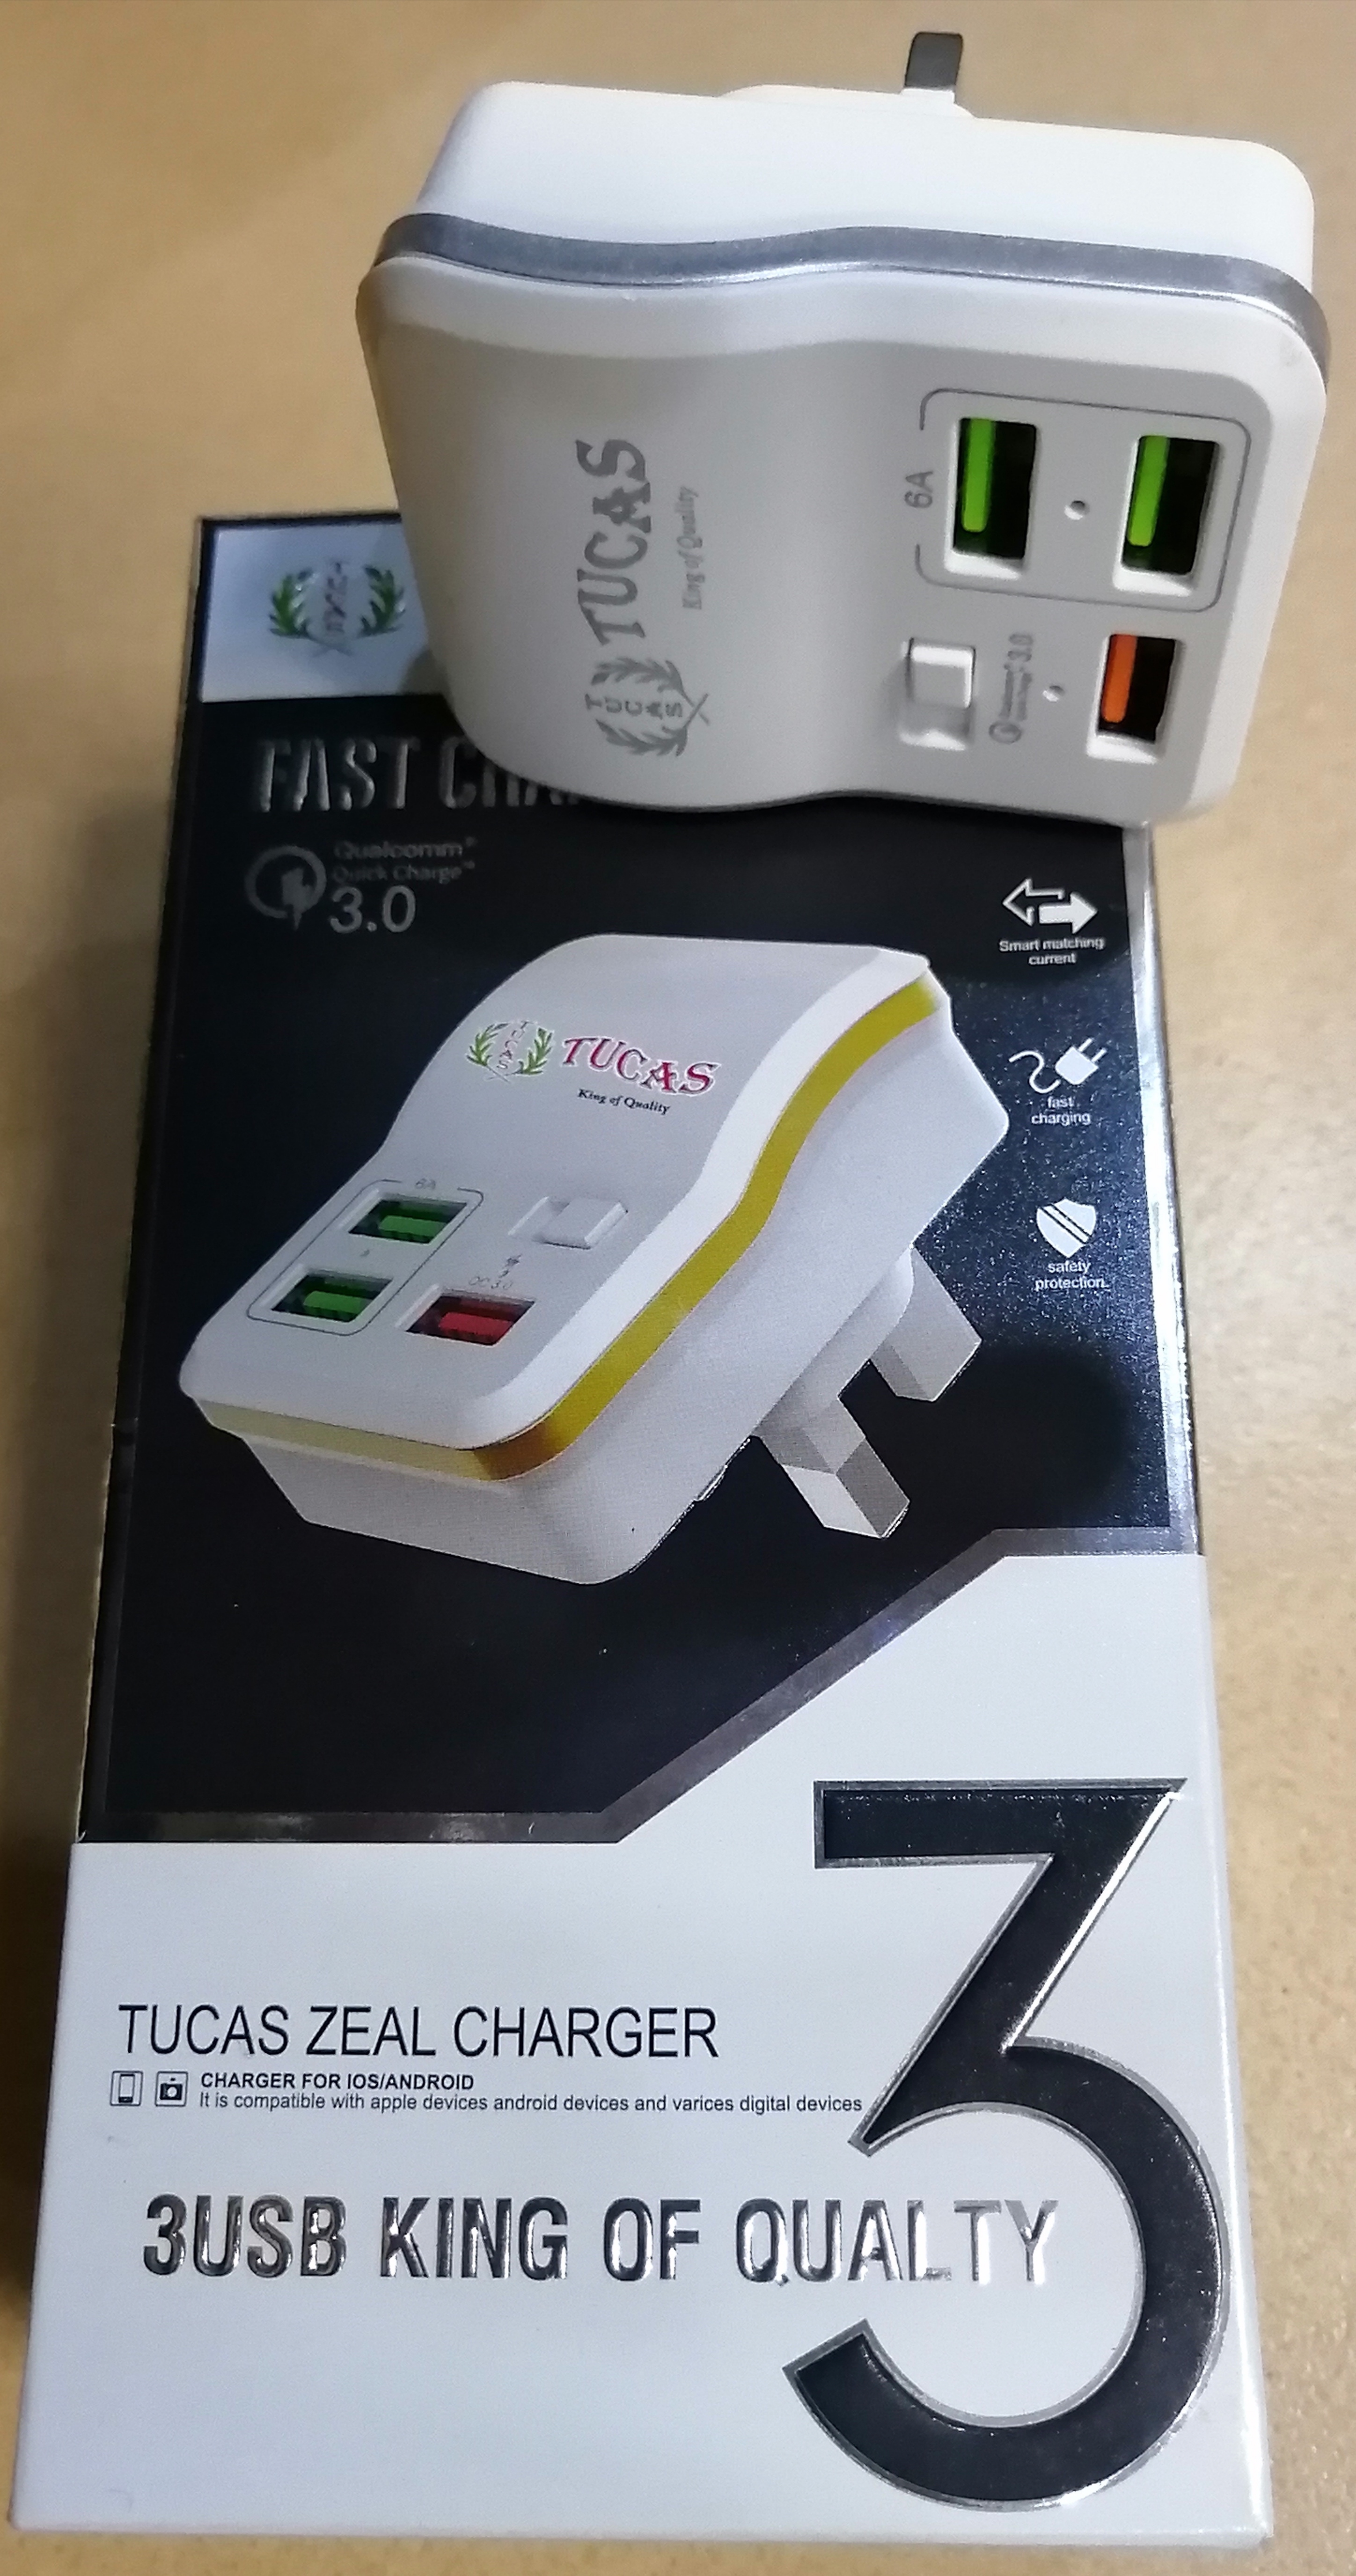 3 USB TUCAS ZEAL CHARGER 